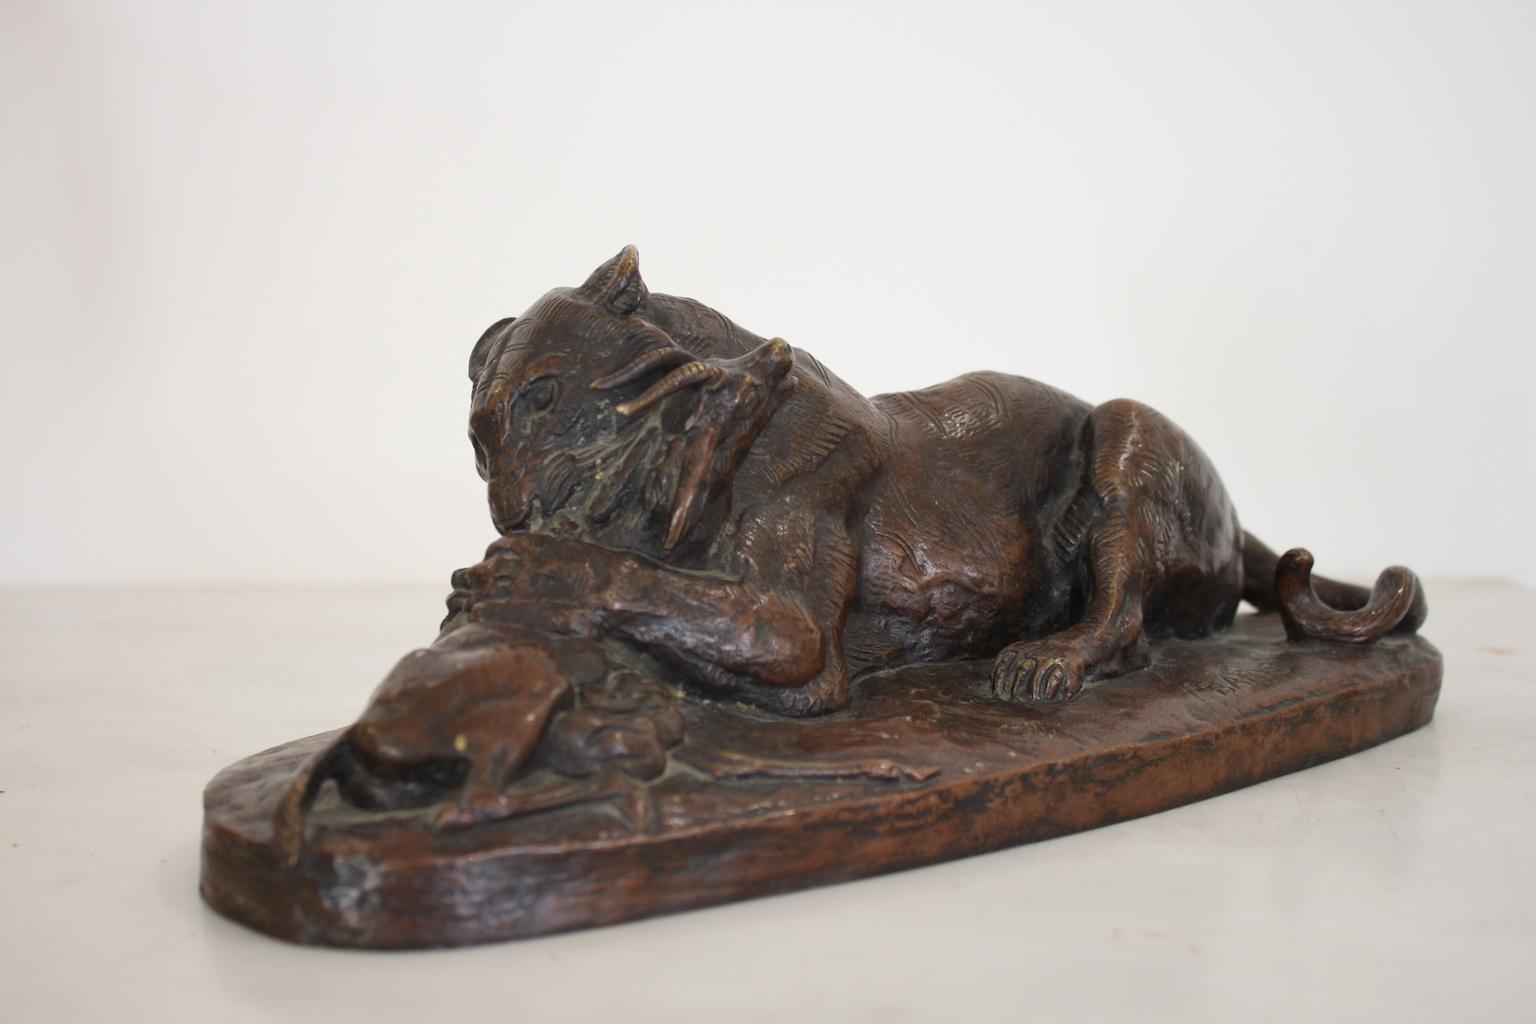 Bronze sculpture by French sculptor Barye, representing a lion devouring an antelope, signed. Cast Iron, very good condition.
Dimensions: Width 30cm, depth 9cm, height 12cm.